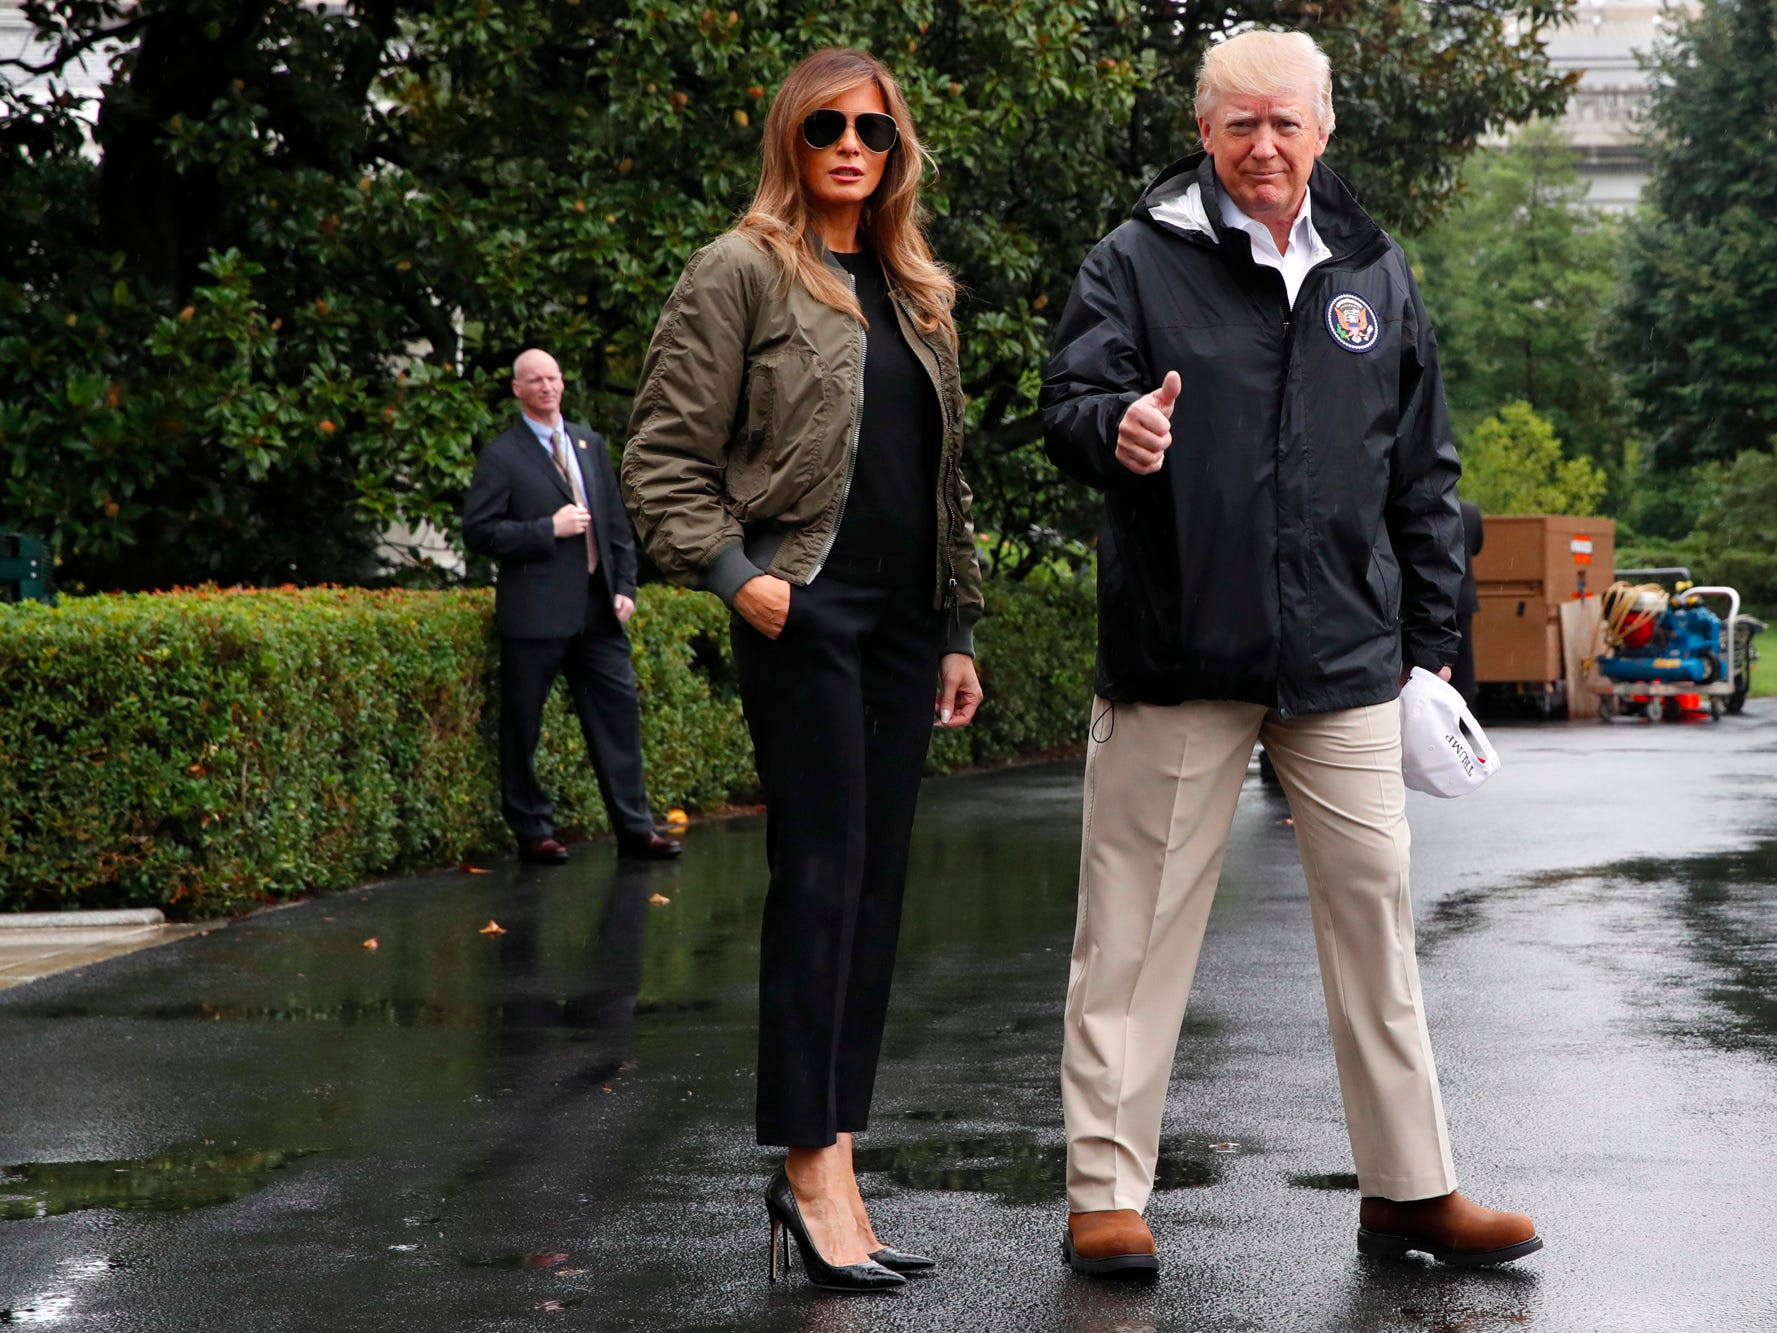 <p>Trump changed into the more sensible footwear — <a href="https://www.businessinsider.com/trump-melania-shoes-heels-stilettos-clothes-2017-10">Timberland work boots</a> — on the plane.</p><p>Donald Trump defended his wife from critics, saying that she had dressed up "out of respect for the White House" and added that she "wants to look good leaving the front entrance."</p>